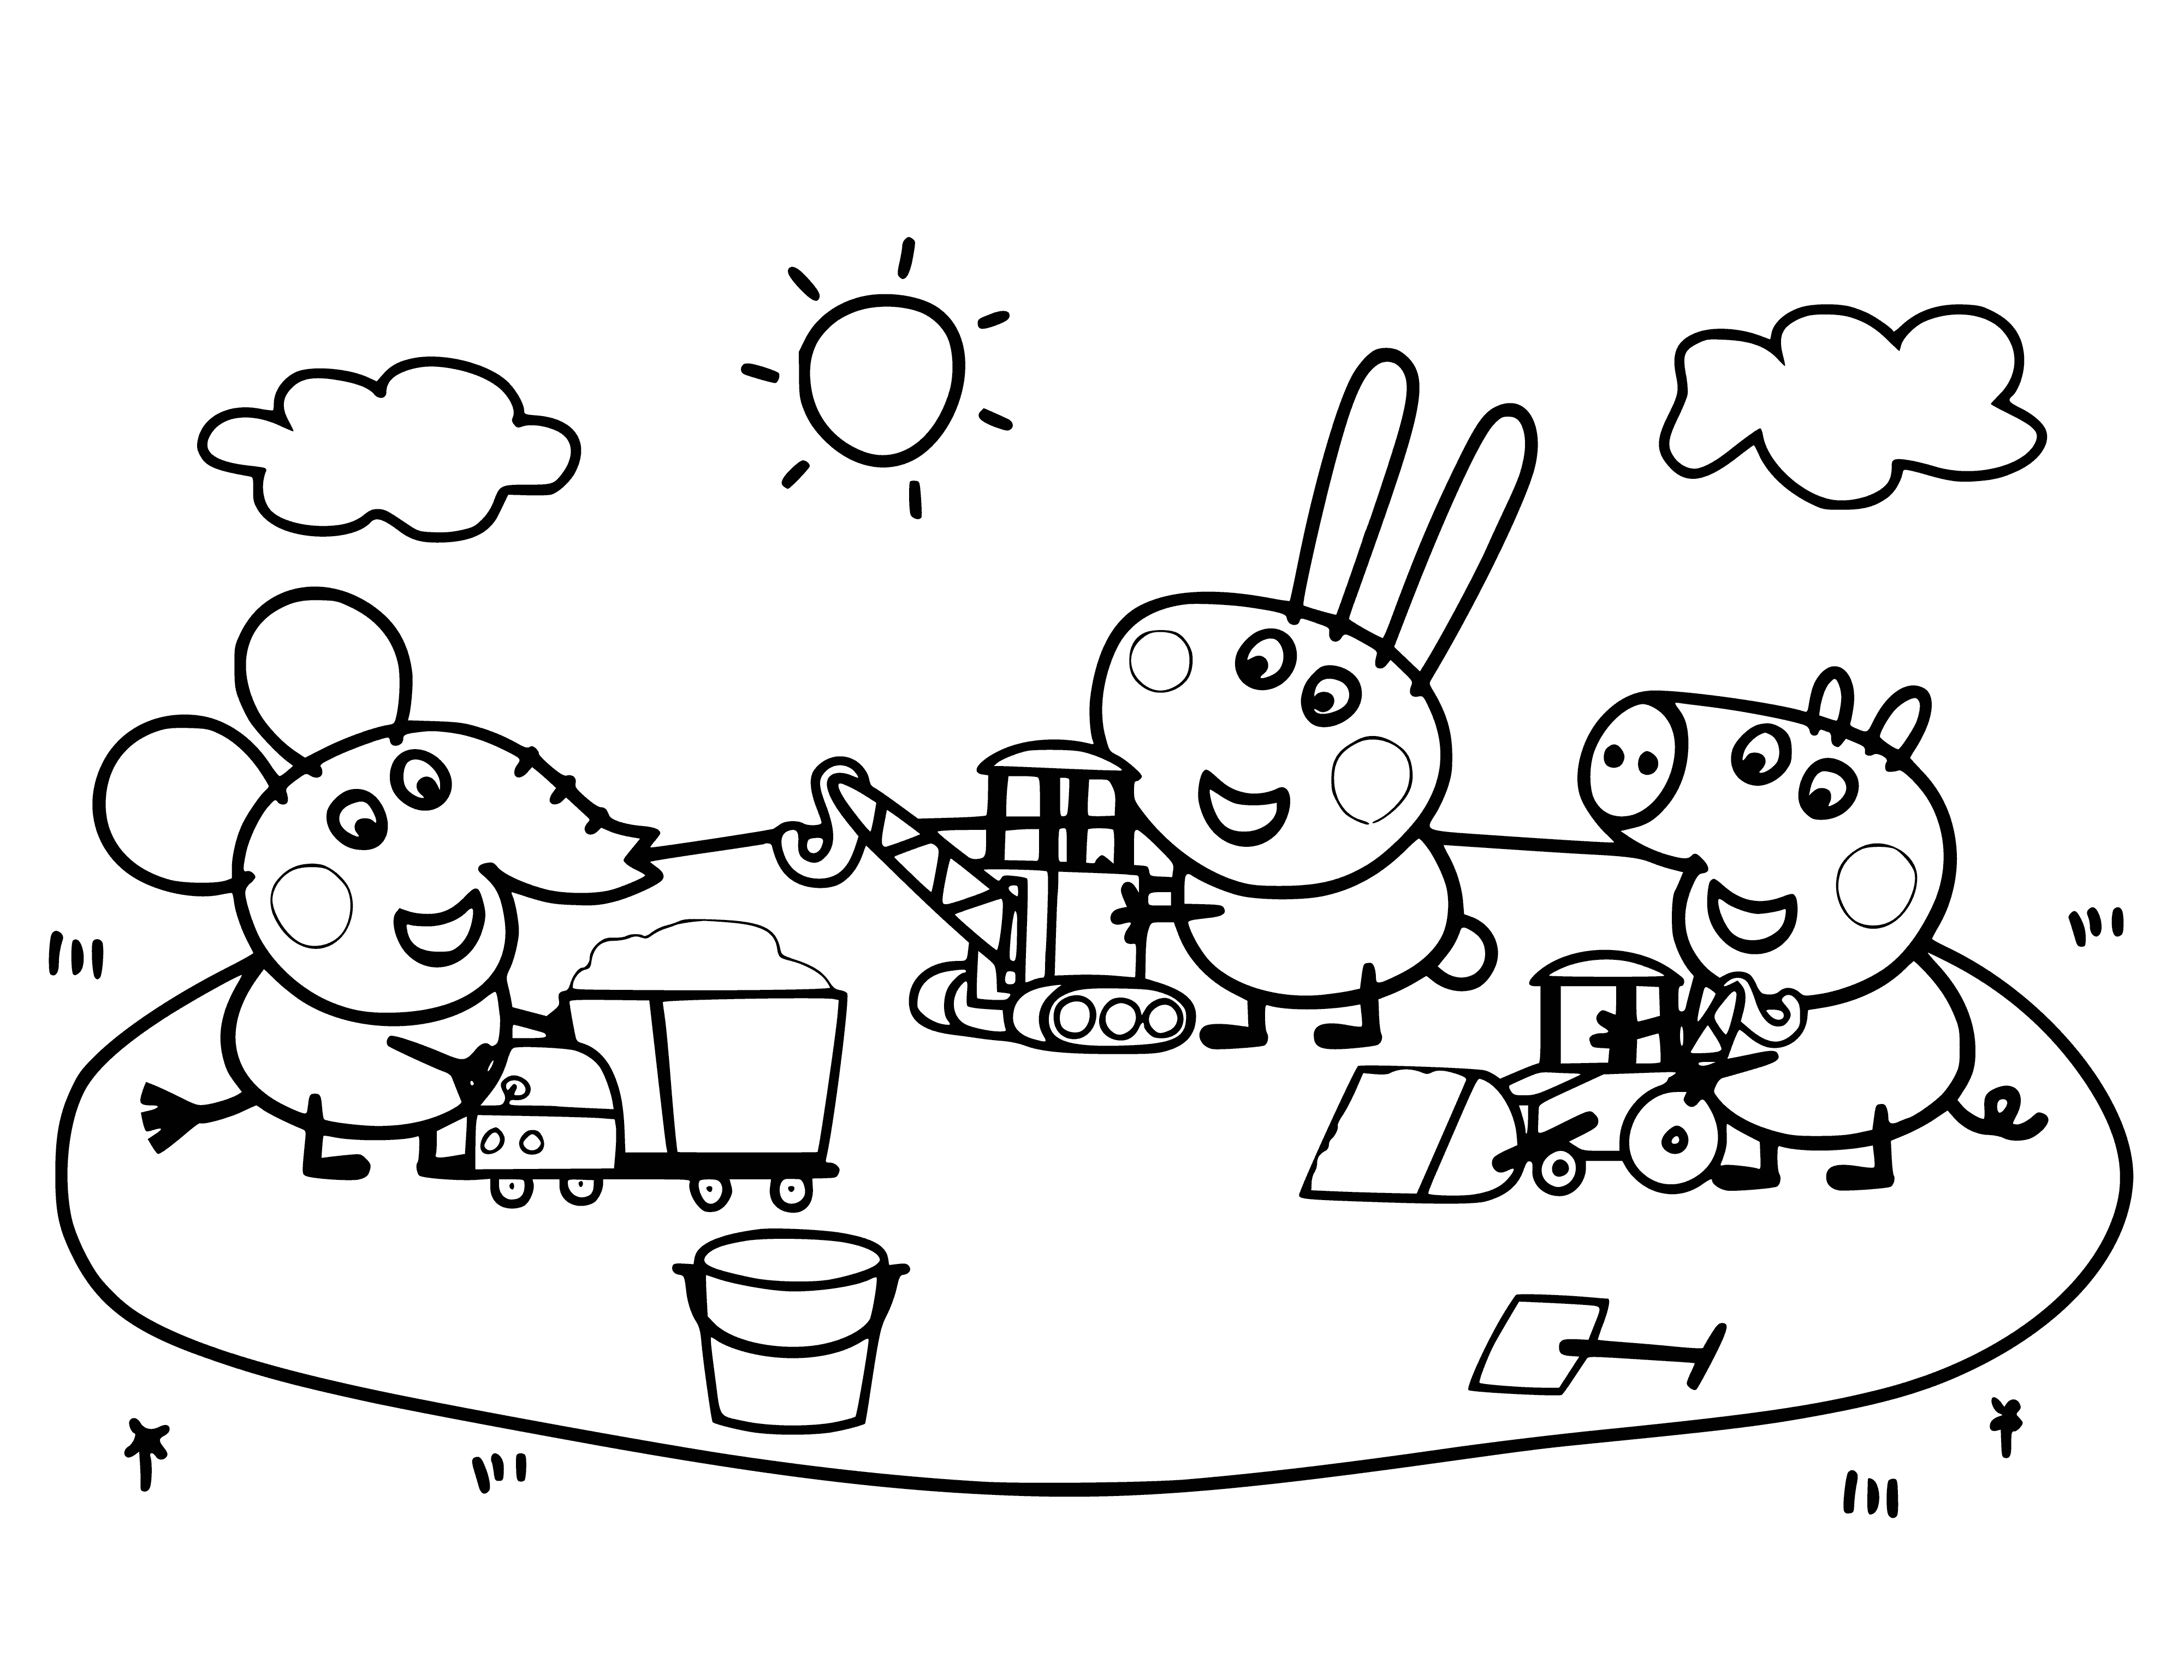 coloring page: Edmont, Richard & George are having fun—elephant's flying a kite, Rabbit playing drums & Pig strumming a guitar.